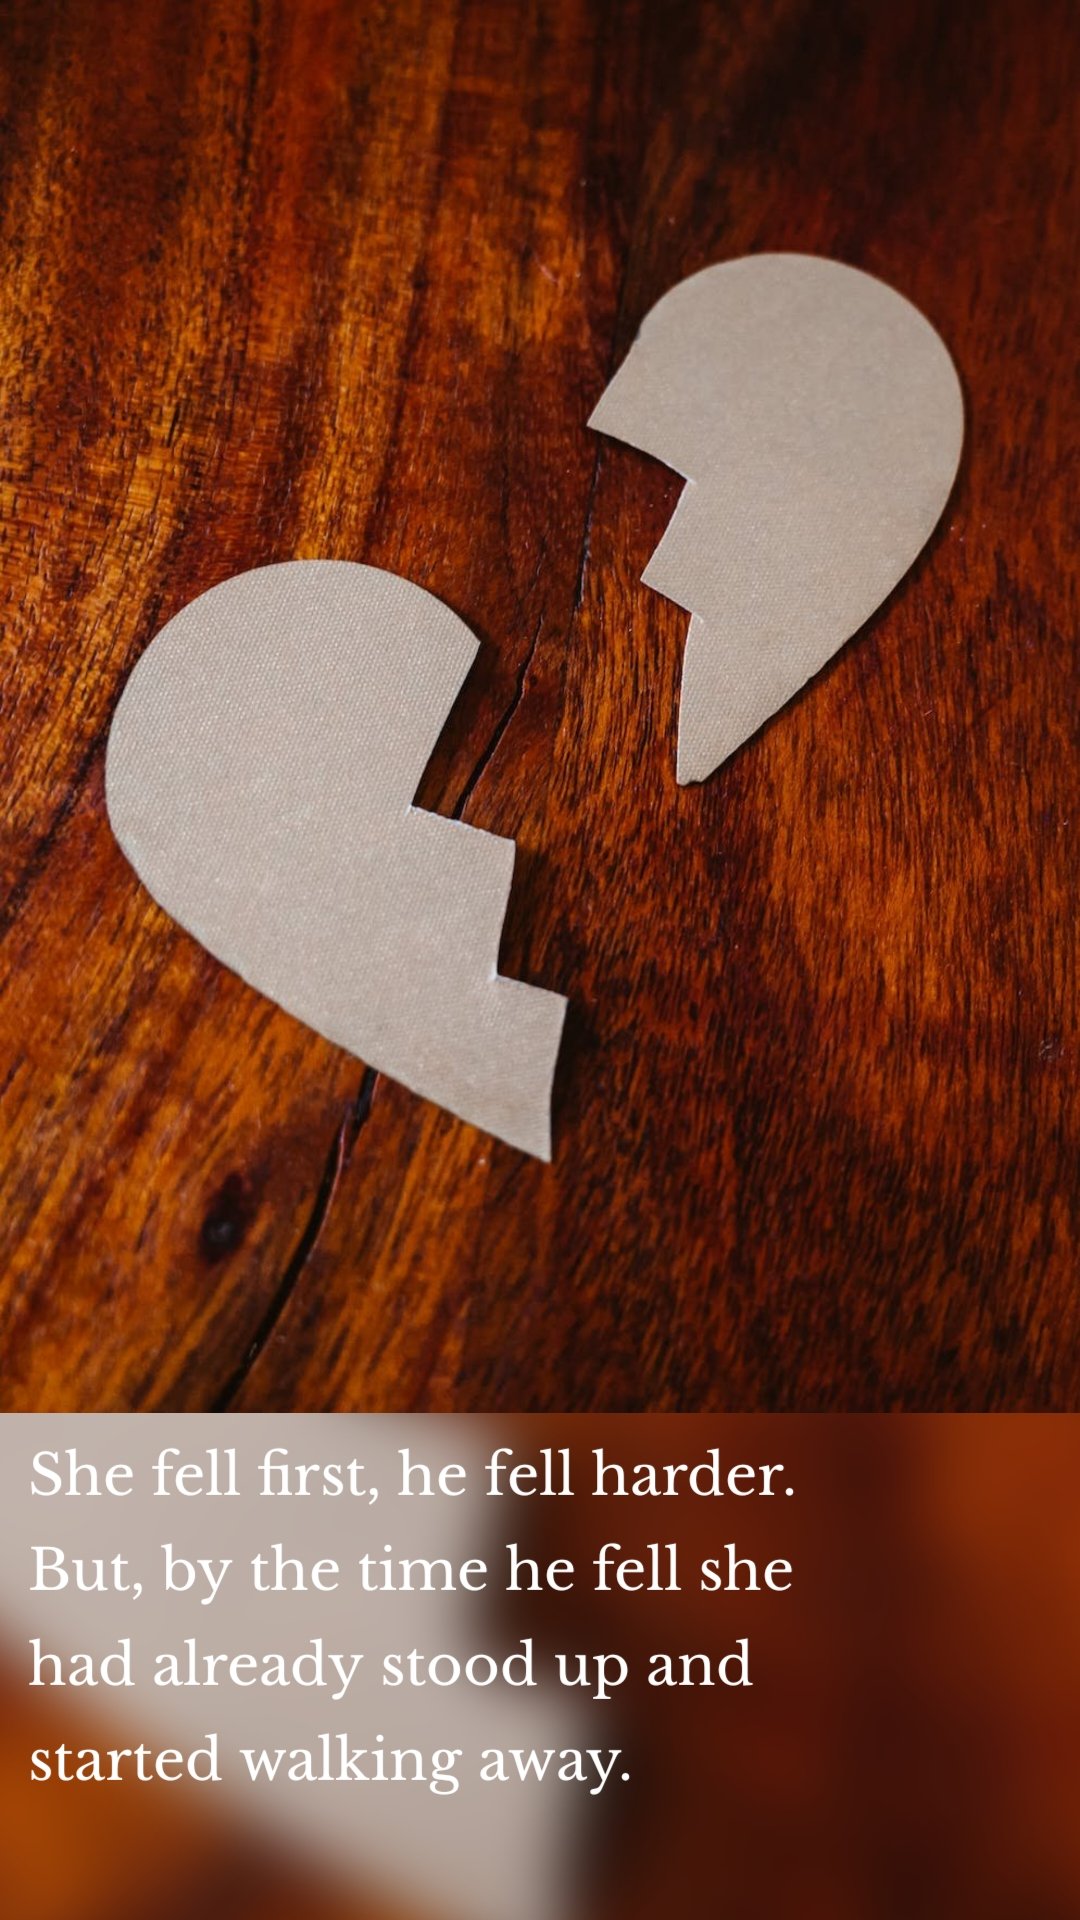 She fell first, he fell harder. But, by the time he fell she had already stood up and started walking away.